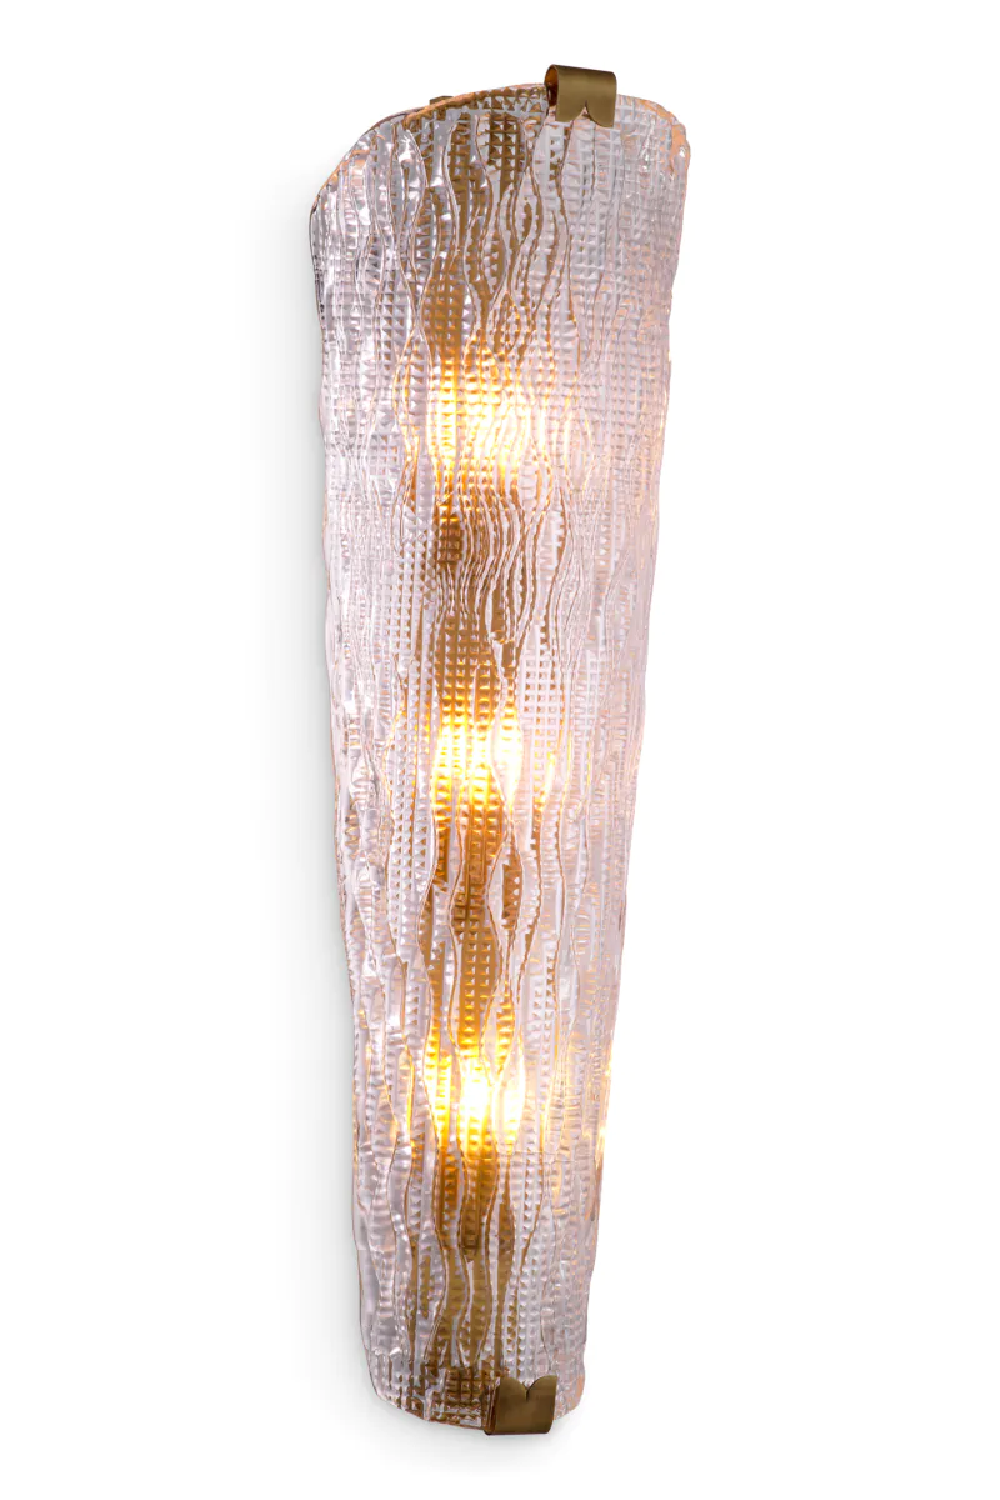 Carved Glass Wall Lamp | Eichholtz Todd | Oroa.com